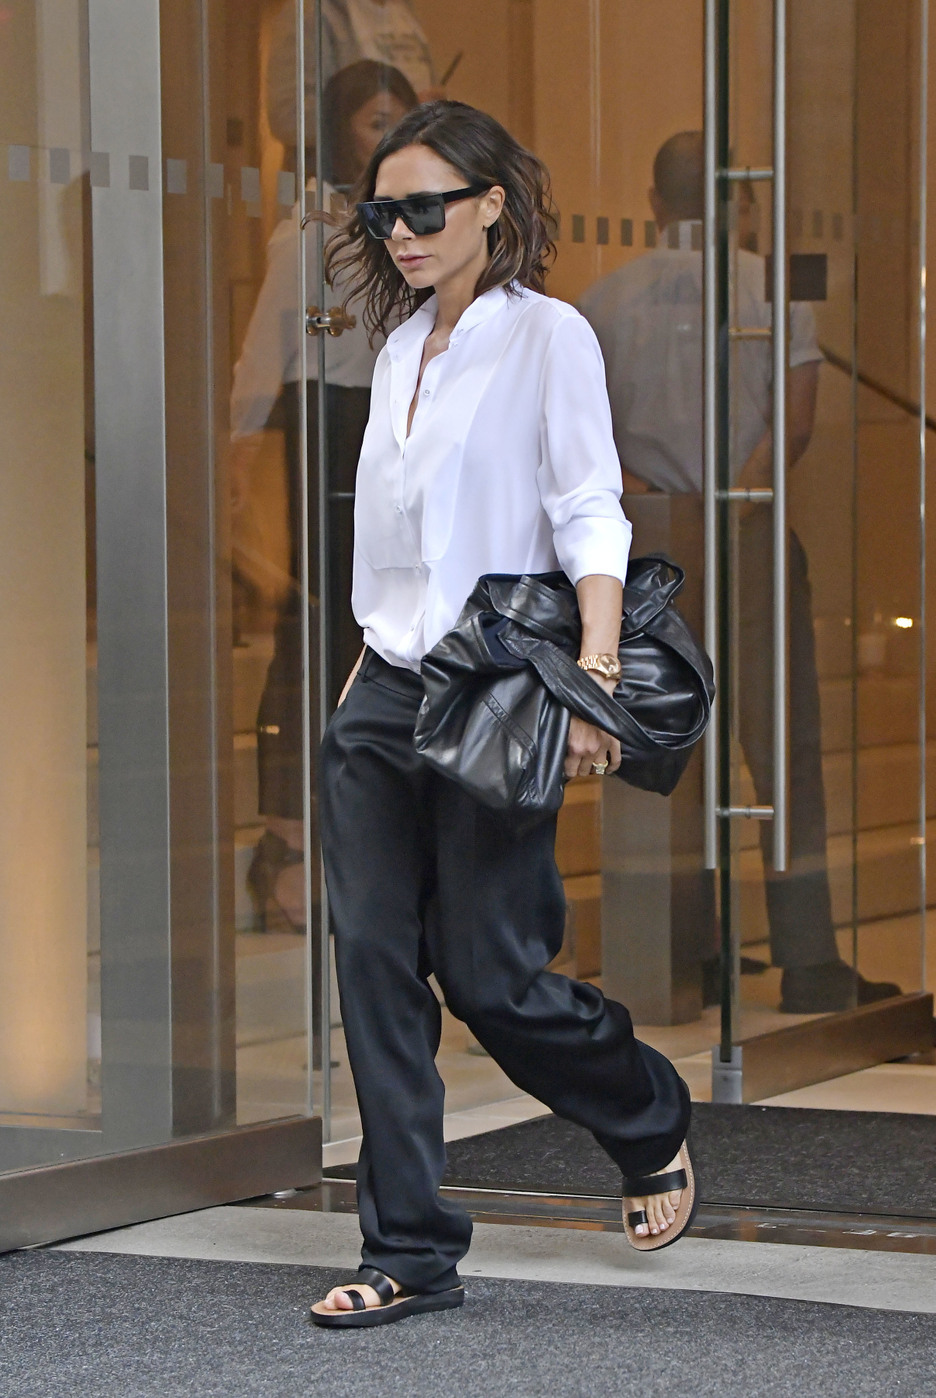 Victoria Beckham Look for Less